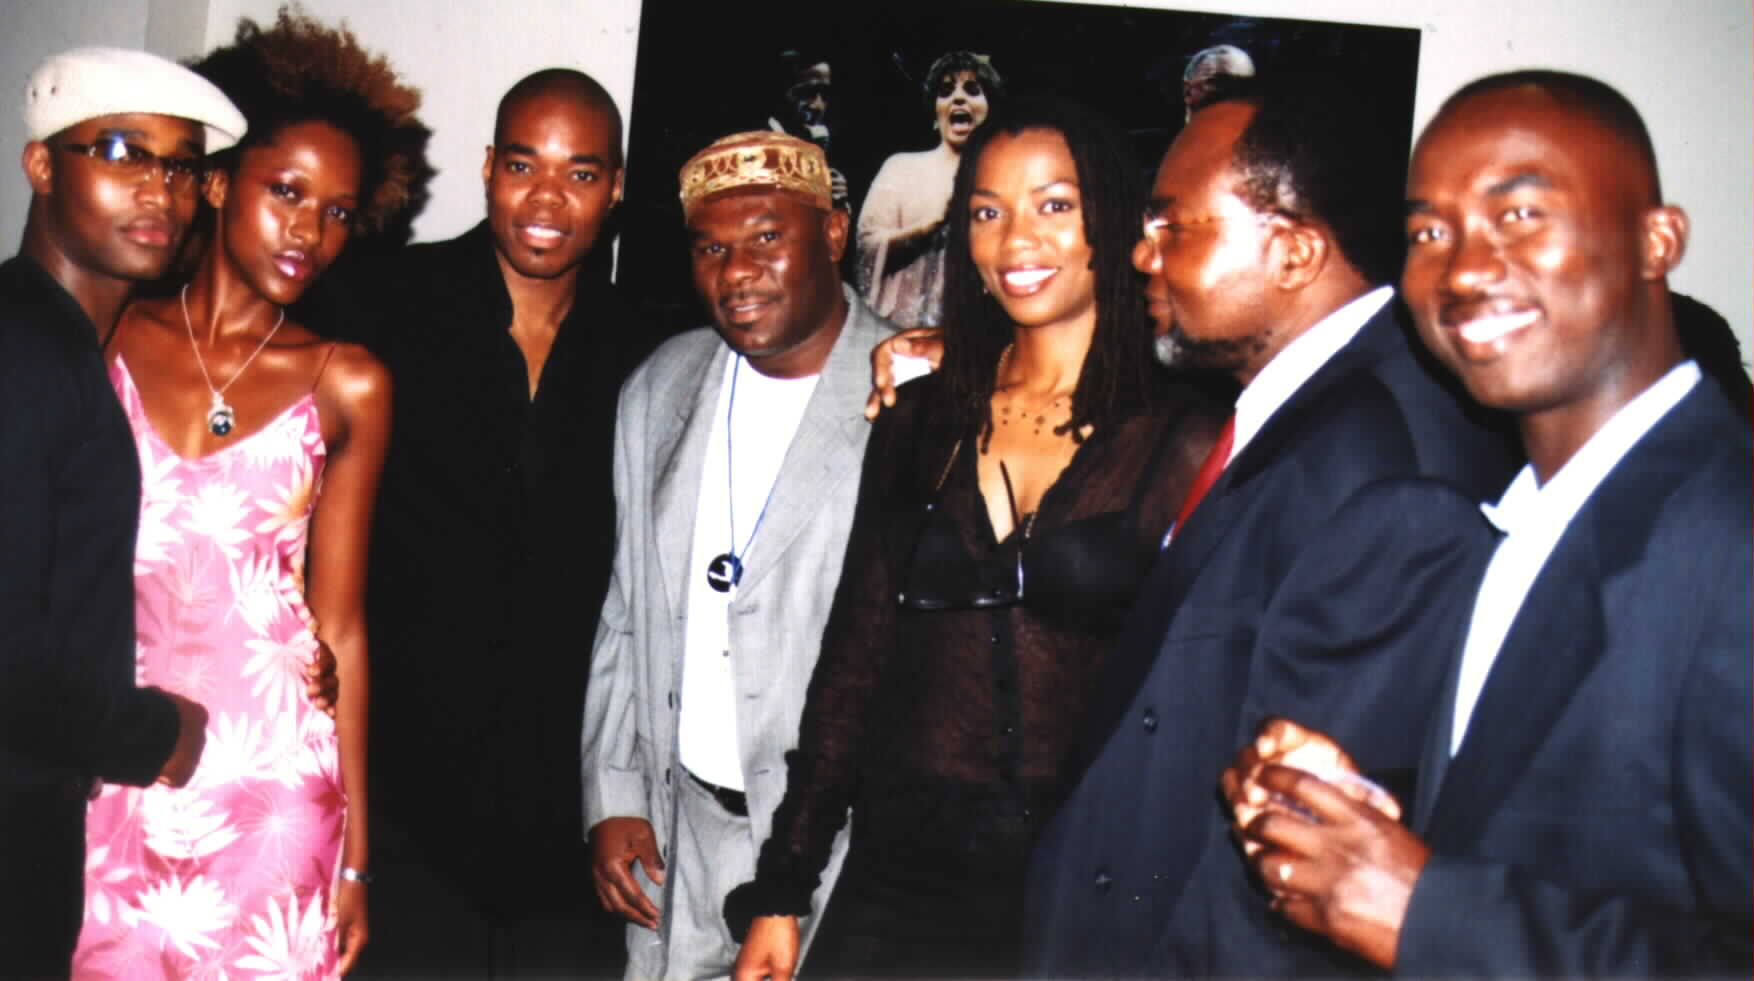 (Picture photographed by Noe Dorestant 3/31/2002:Haitian stars and fans )
give credit where credit is due. 